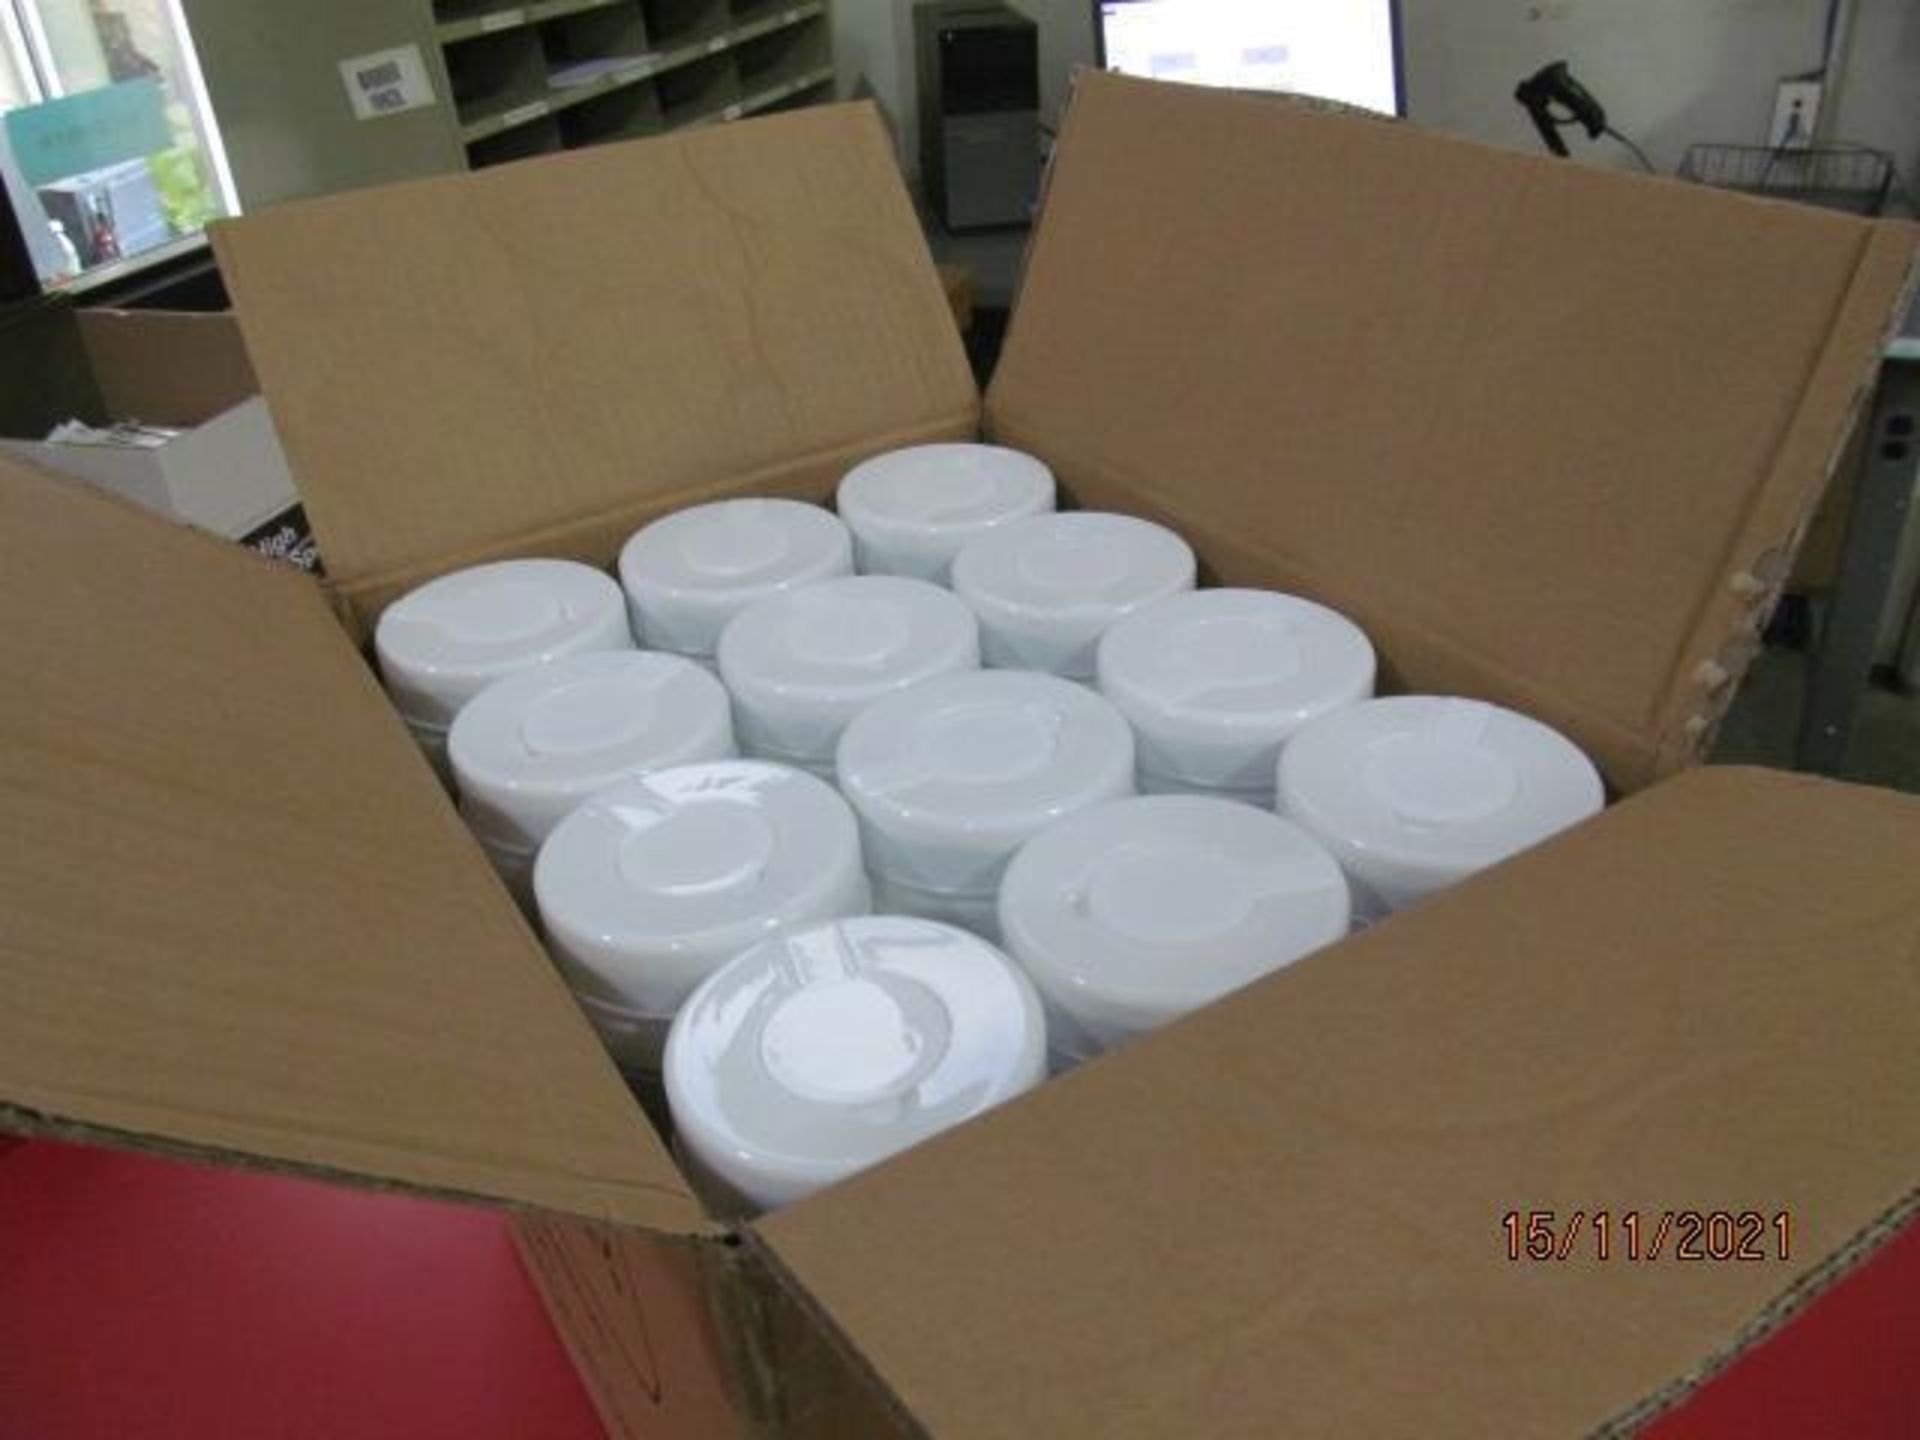 Lot of Waxman Kleen Freak Sanitizing Wipes consisting of 6,480 packages on 10 pallets. Each package - Image 5 of 11